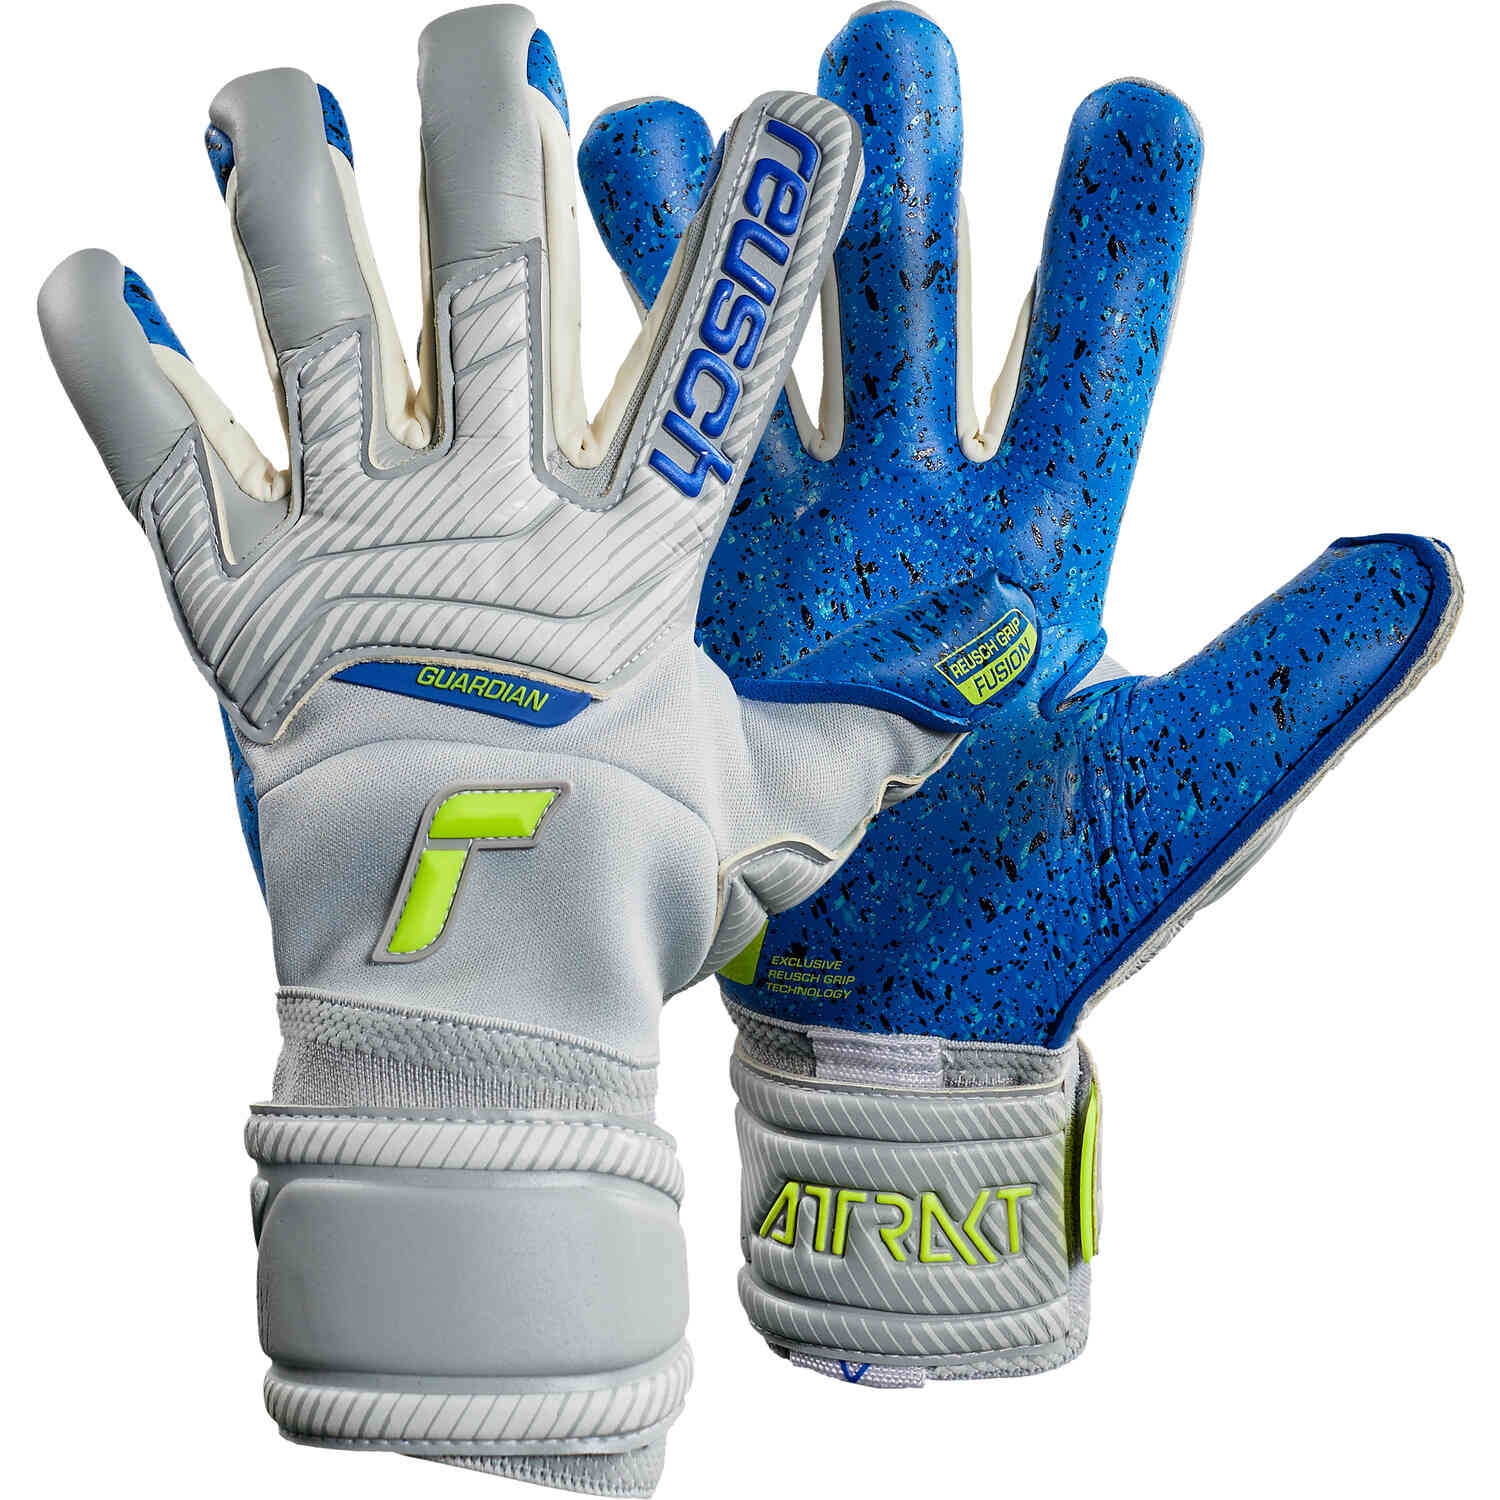 Redi Soccer Youth 5 Finger Protection Goalkeeper Gloves with German Contact Latex for Pro-Level Grip All-Weather Sizes 7-8 